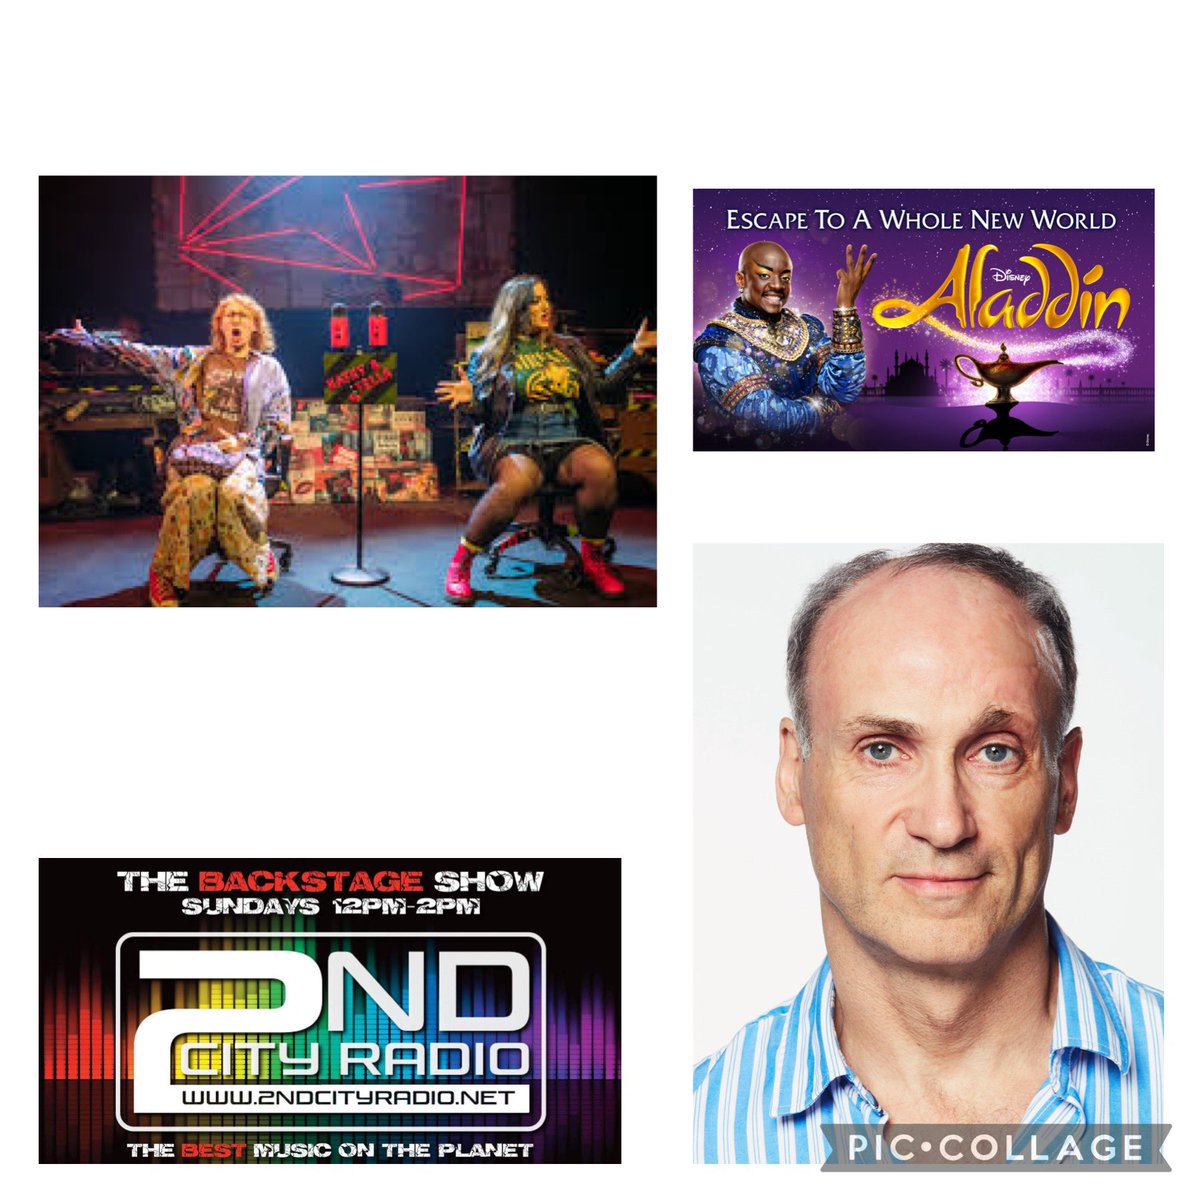 Live from 12pm #Backstage @SECONDCITYRADIO with Neal Foster @BronteBarbieee Adam Strong talking #AwfulAuntie @KathyStellaMP @aladdin Tune in at 2ndcityradio.net #theatre @About_GracePR @MKTheatre @RichmondTheatre @birminghamstage @CHUFFMEDIA @StoryHouse_PR